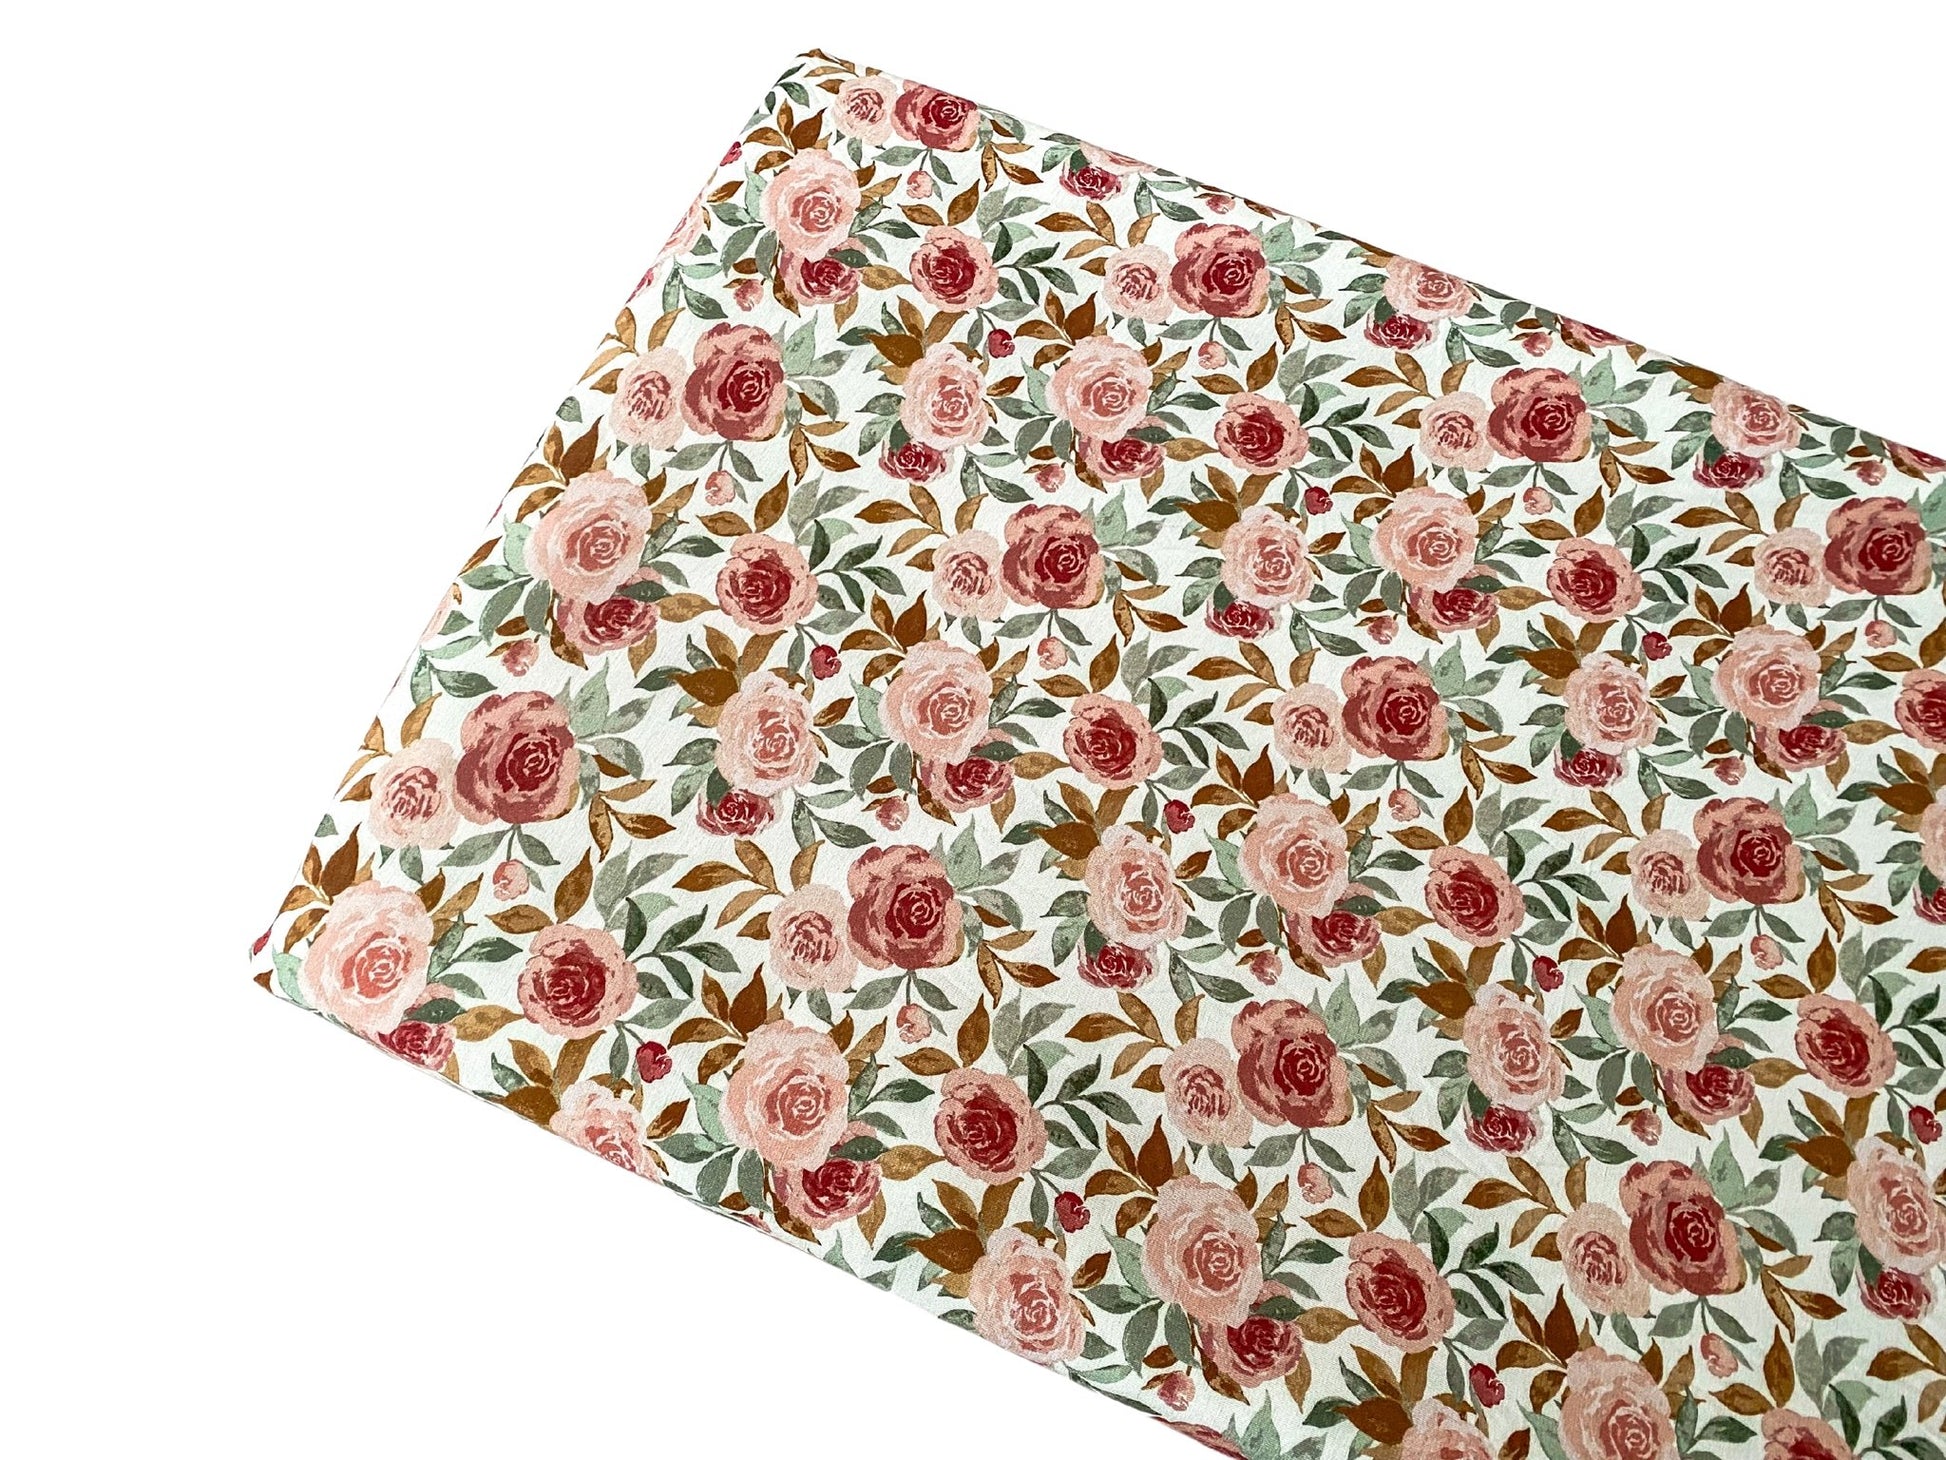 Bamboo Premium Changing Pad Cover - Dusty Pink Floral - Harp Angel Boutique